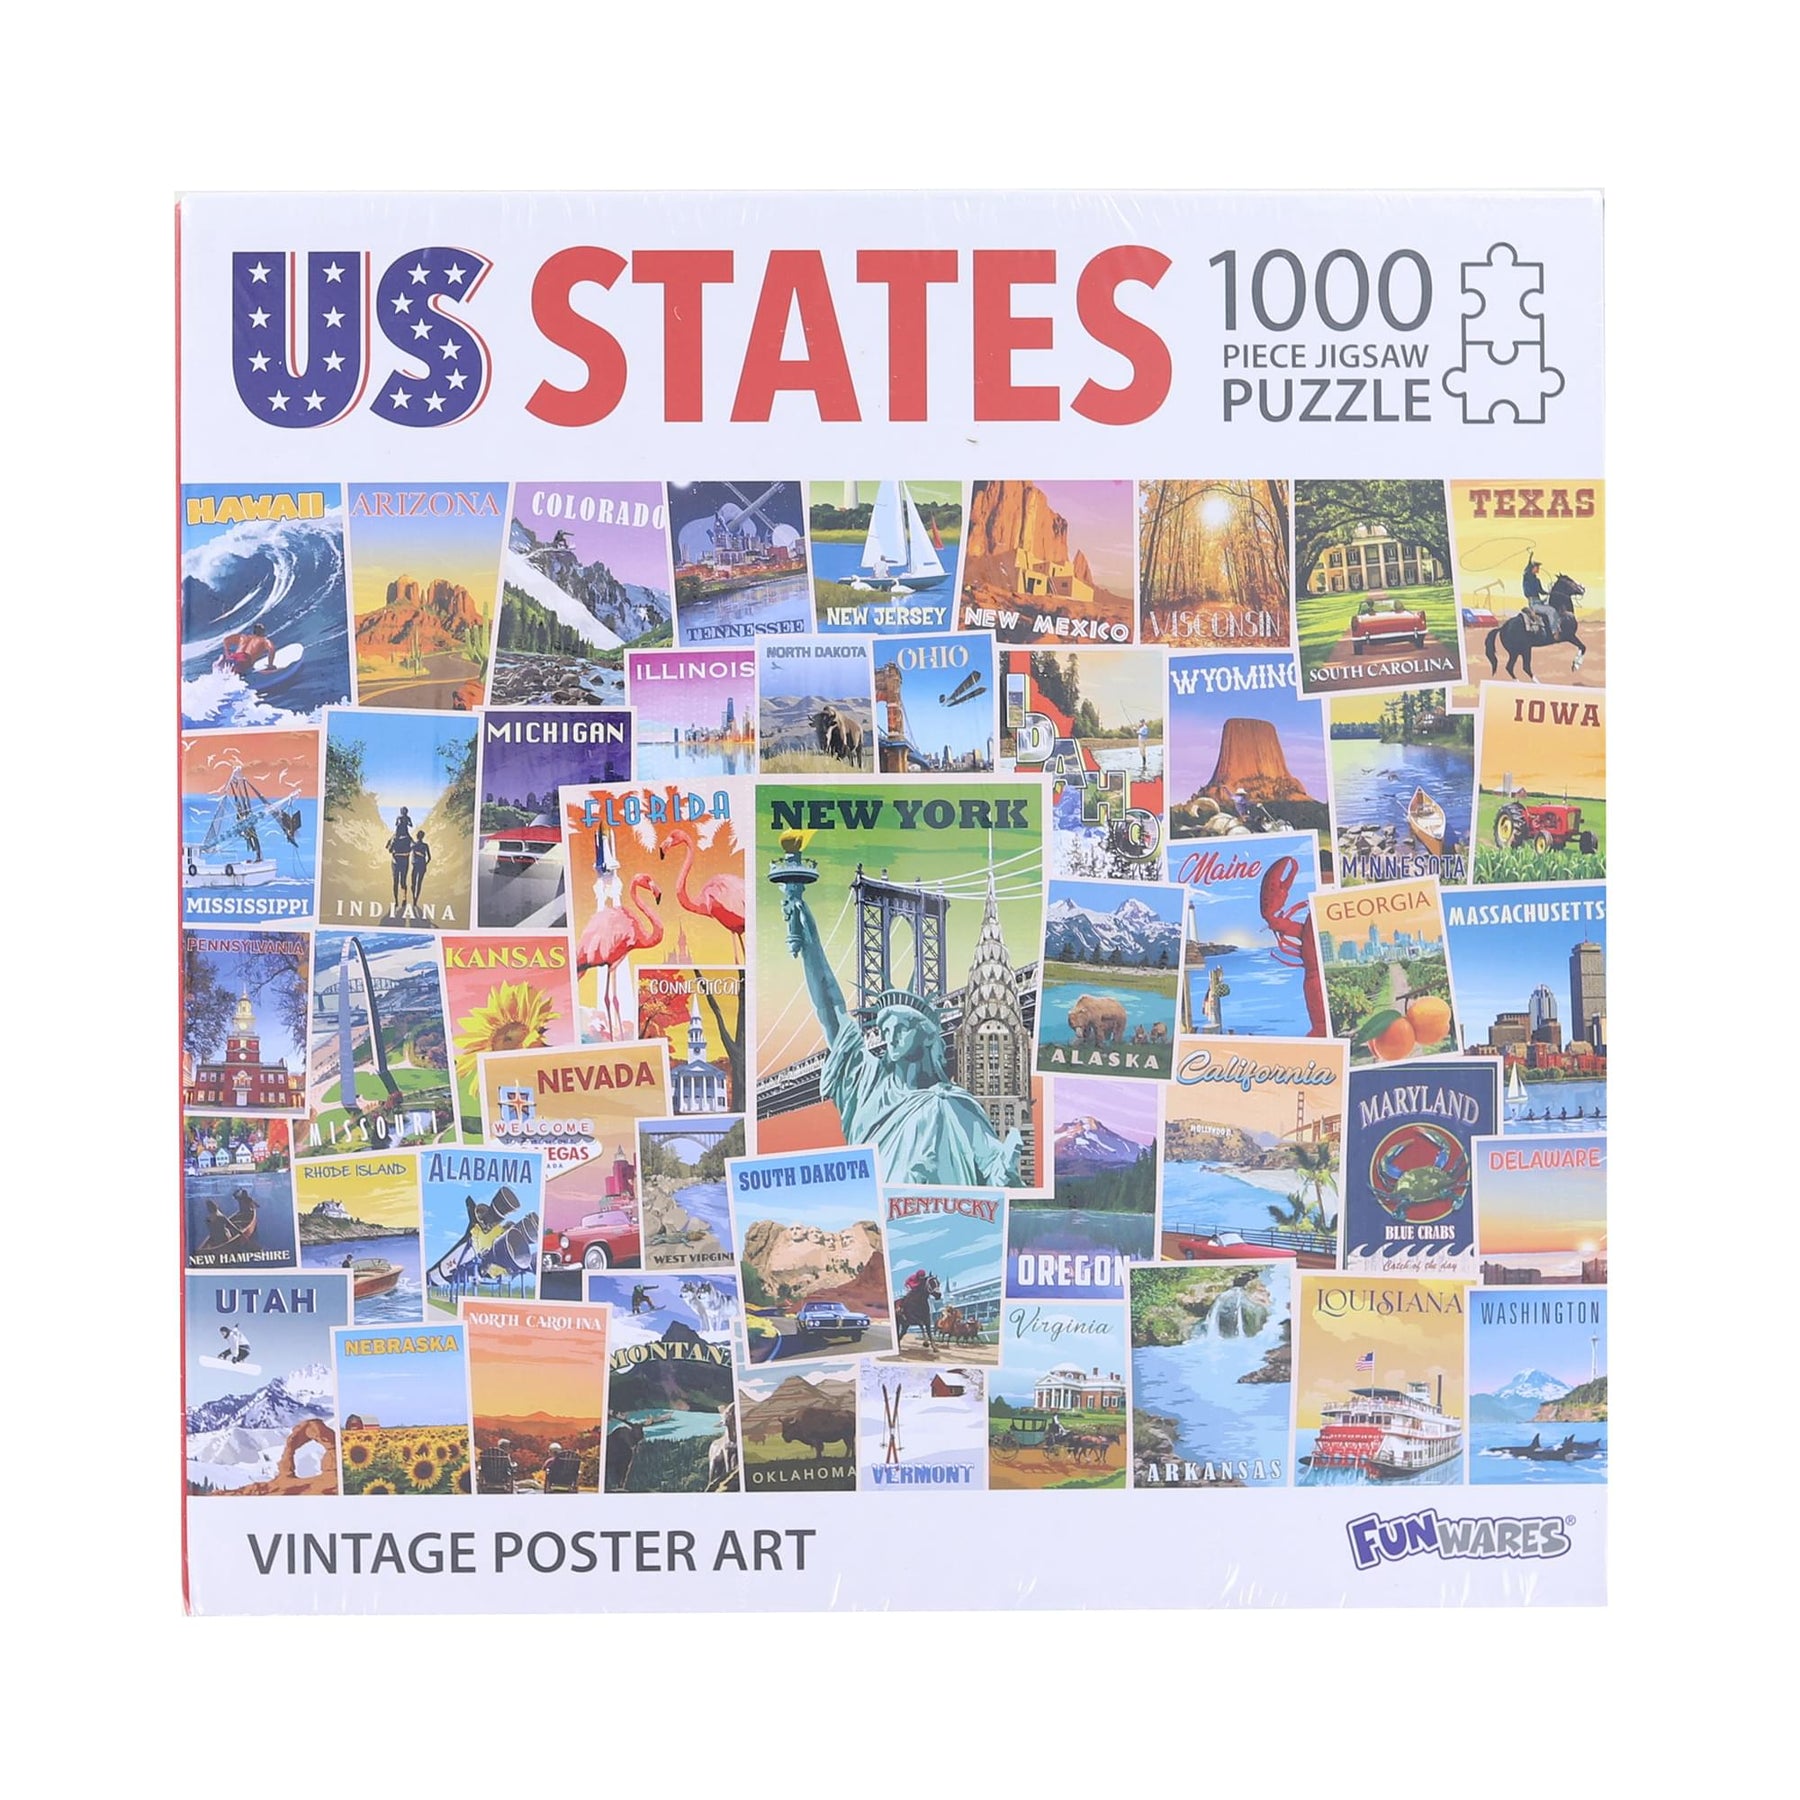 US States Vintage Poster Art 1000 Piece Jigsaw Puzzle